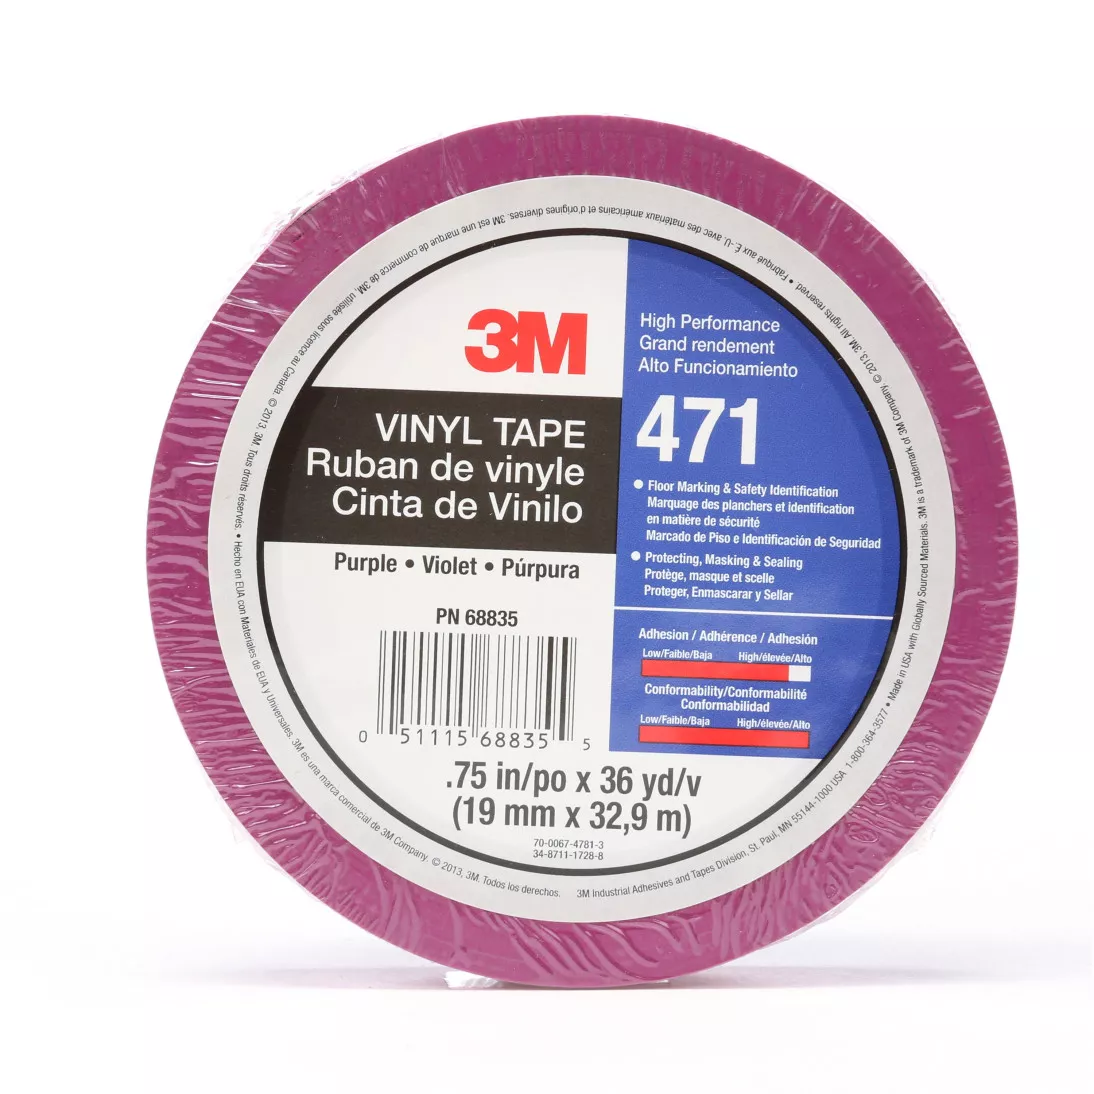 3M™ Vinyl Tape 471, Purple, 3/4 in x 36 yd, 5.2 mil, 48 rolls per case,
Individually Wrapped Conveniently Packaged